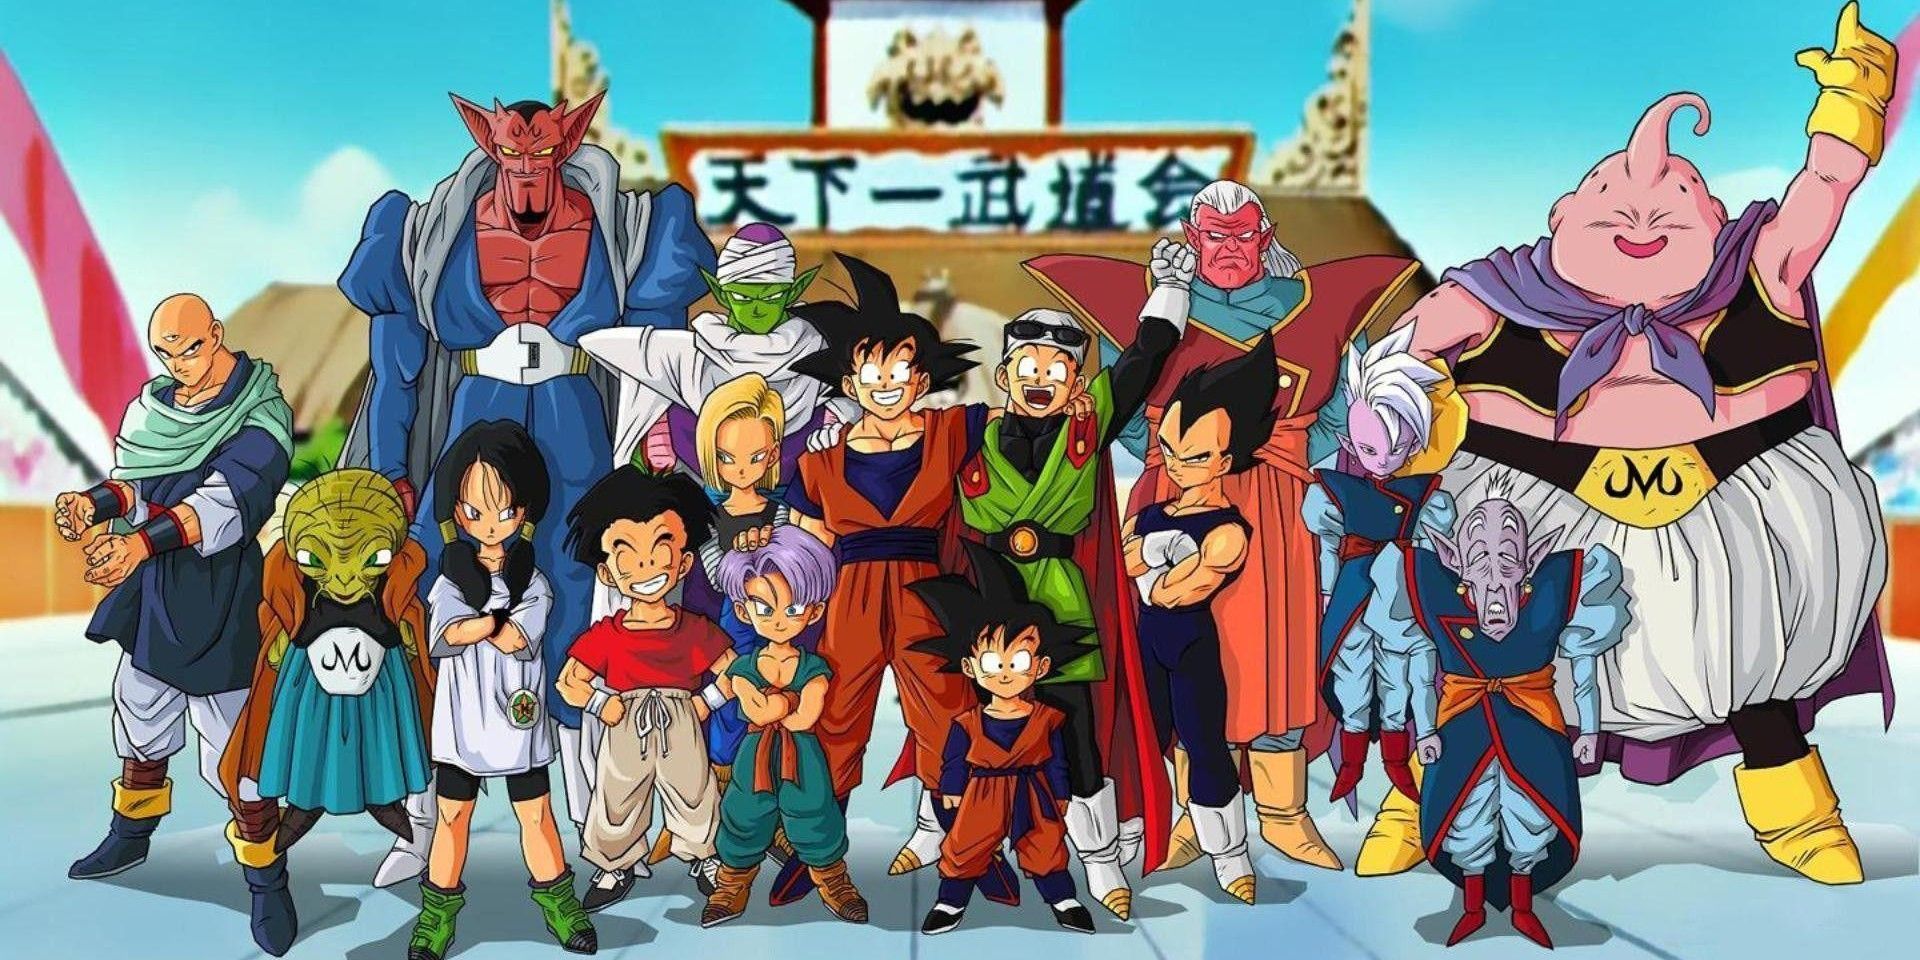 dragon ball z kai the final chapters complete series